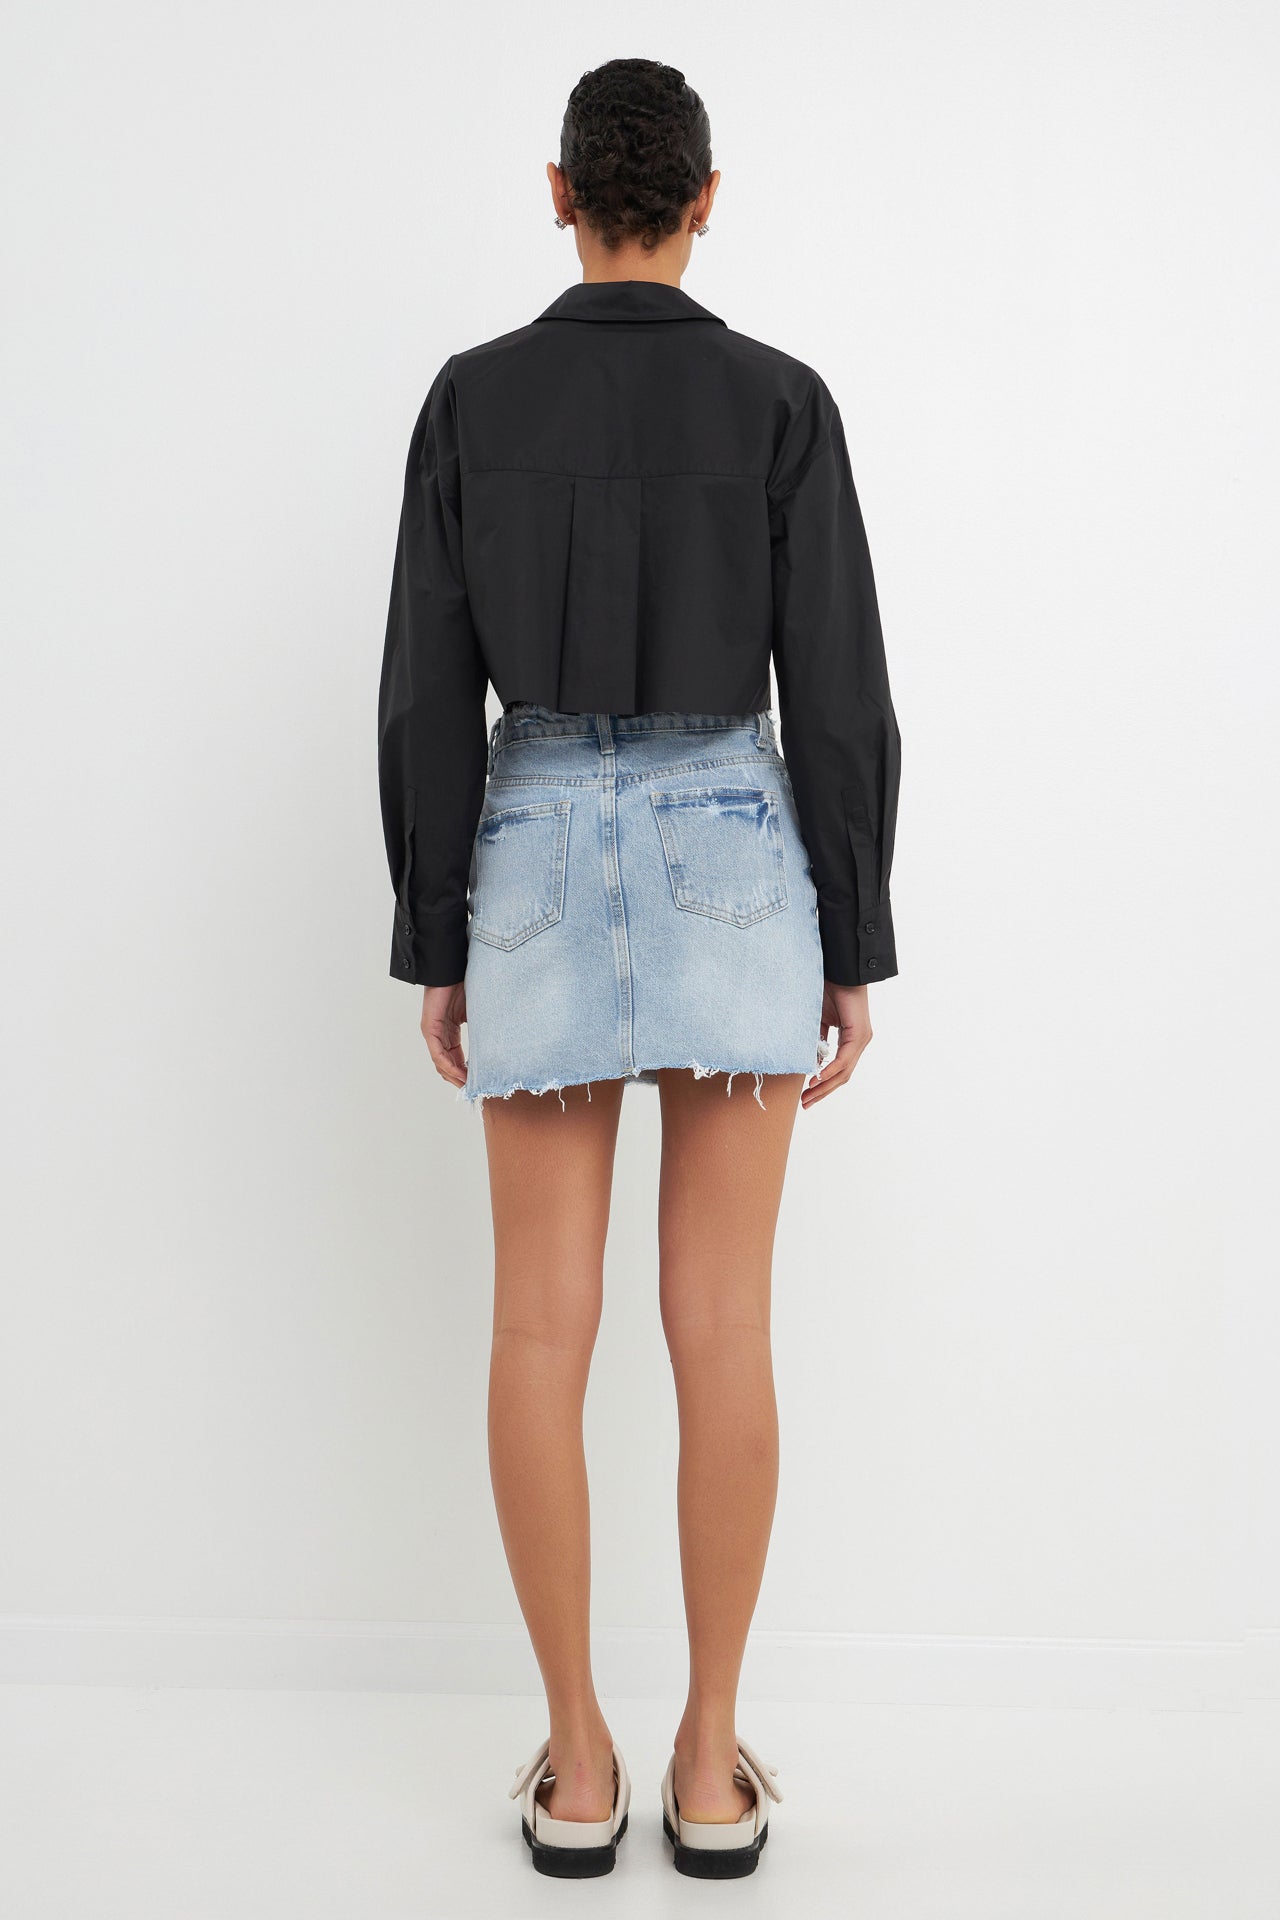 GREY LAB-High Low Acid Wash Denim Skirt-sale SKIRTS available at Objectrare